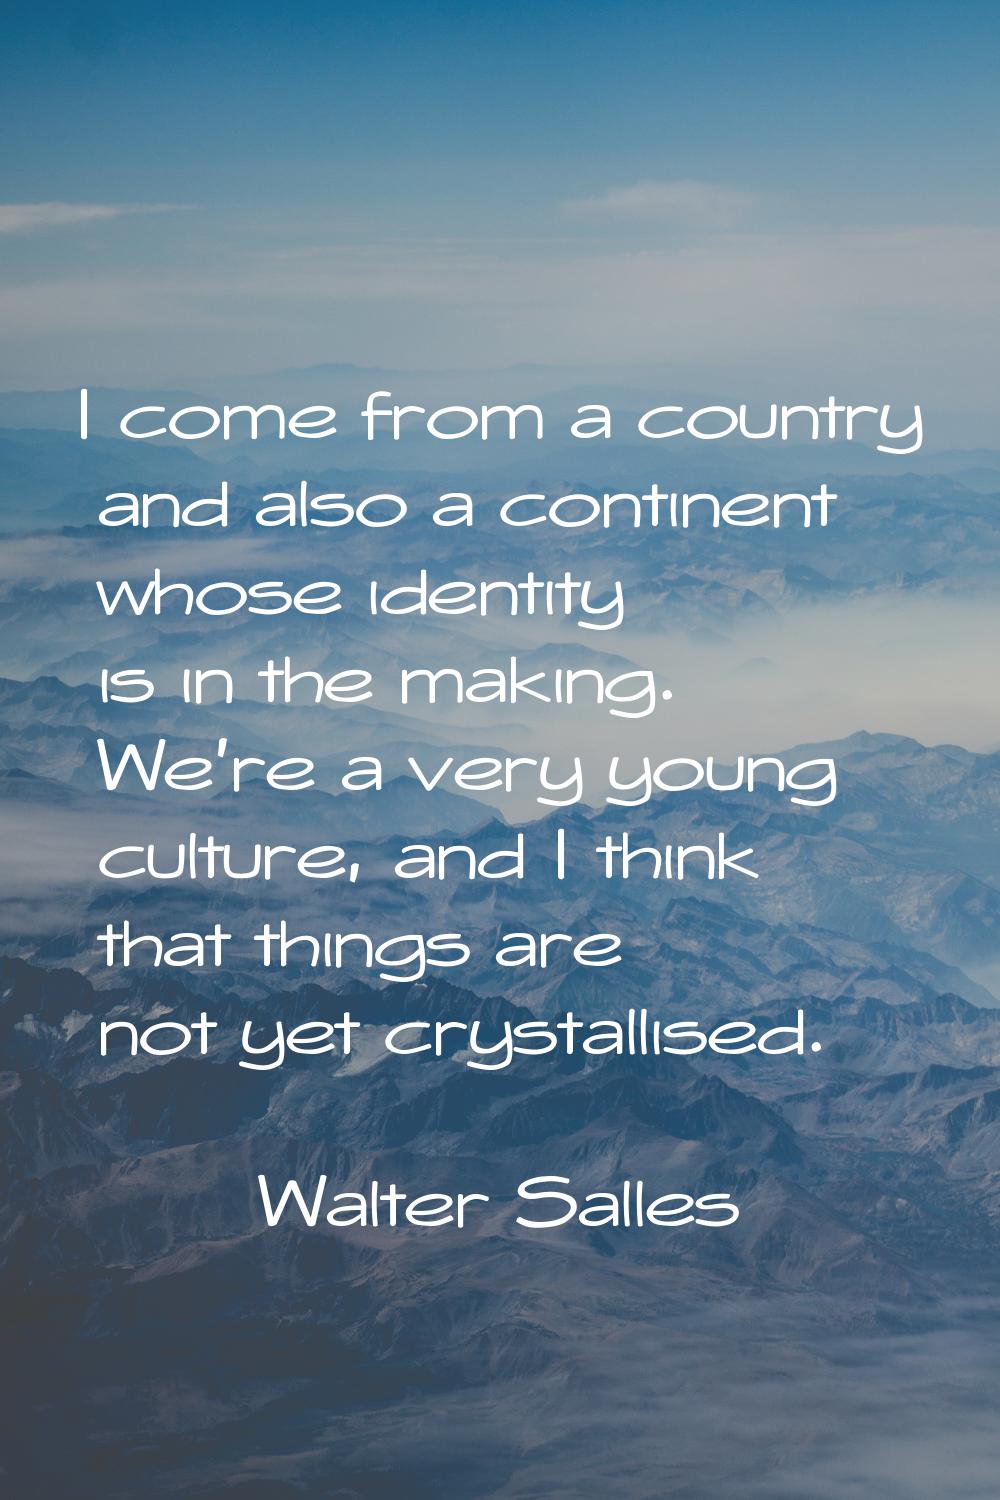 I come from a country and also a continent whose identity is in the making. We're a very young cult